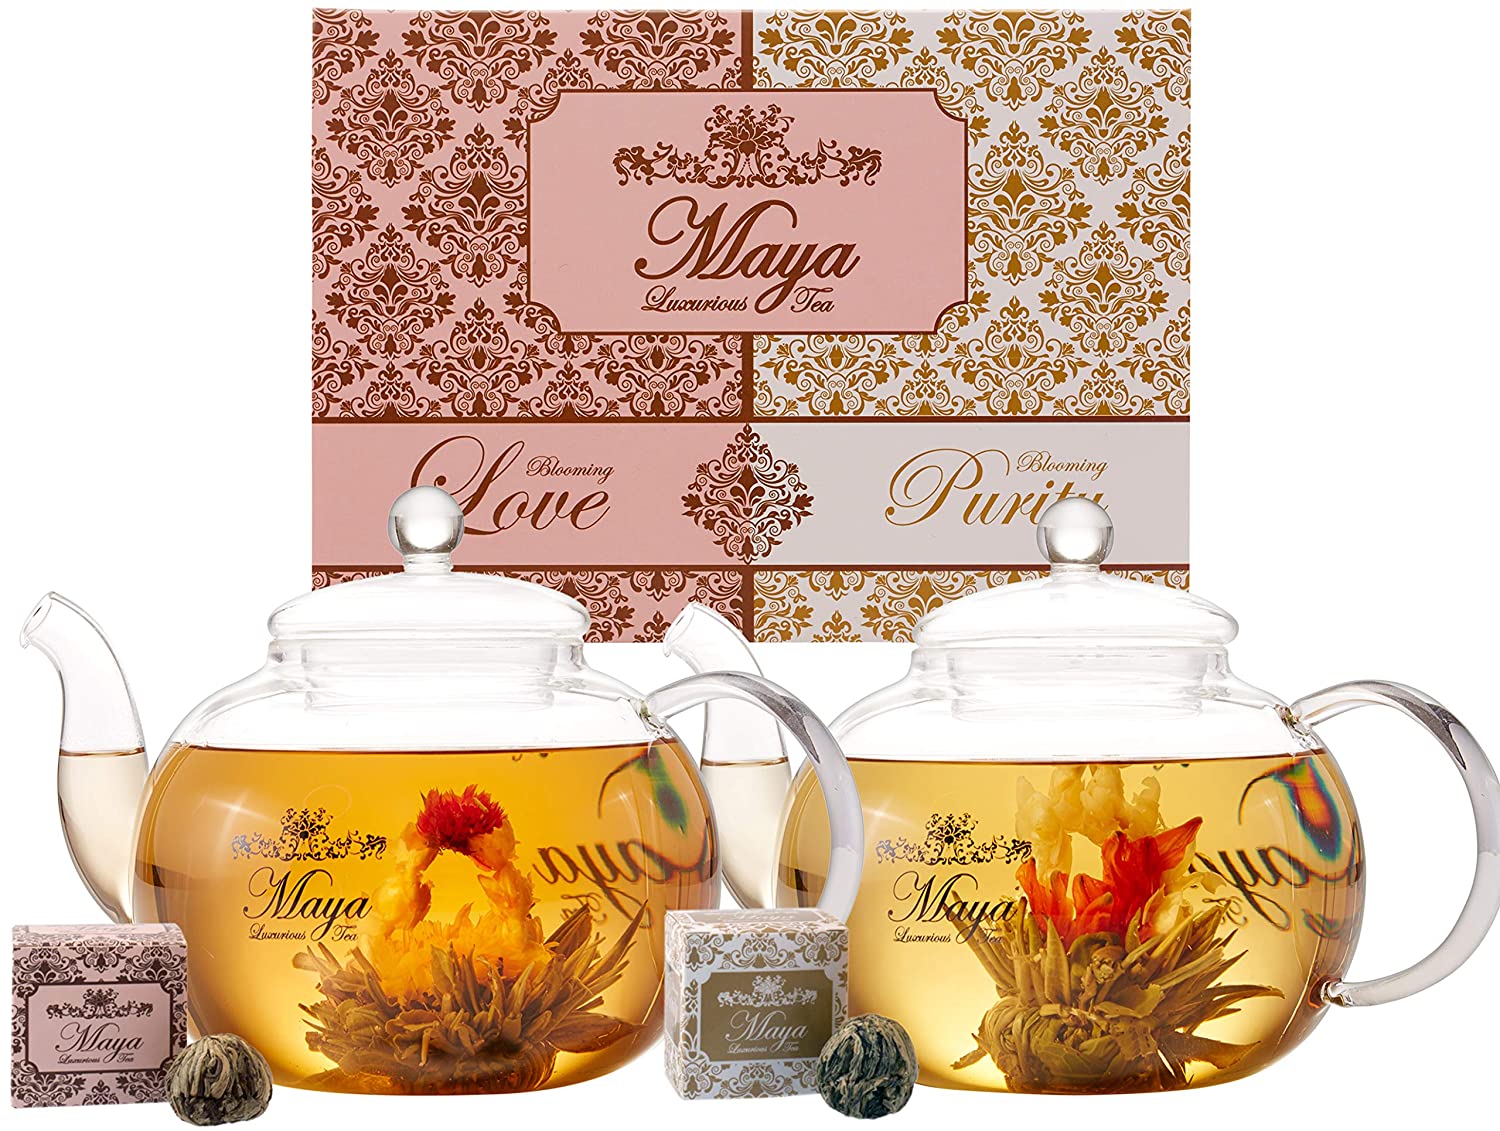 Blooming Love & Purity by Maya Luxurious    OUT OF STOCK